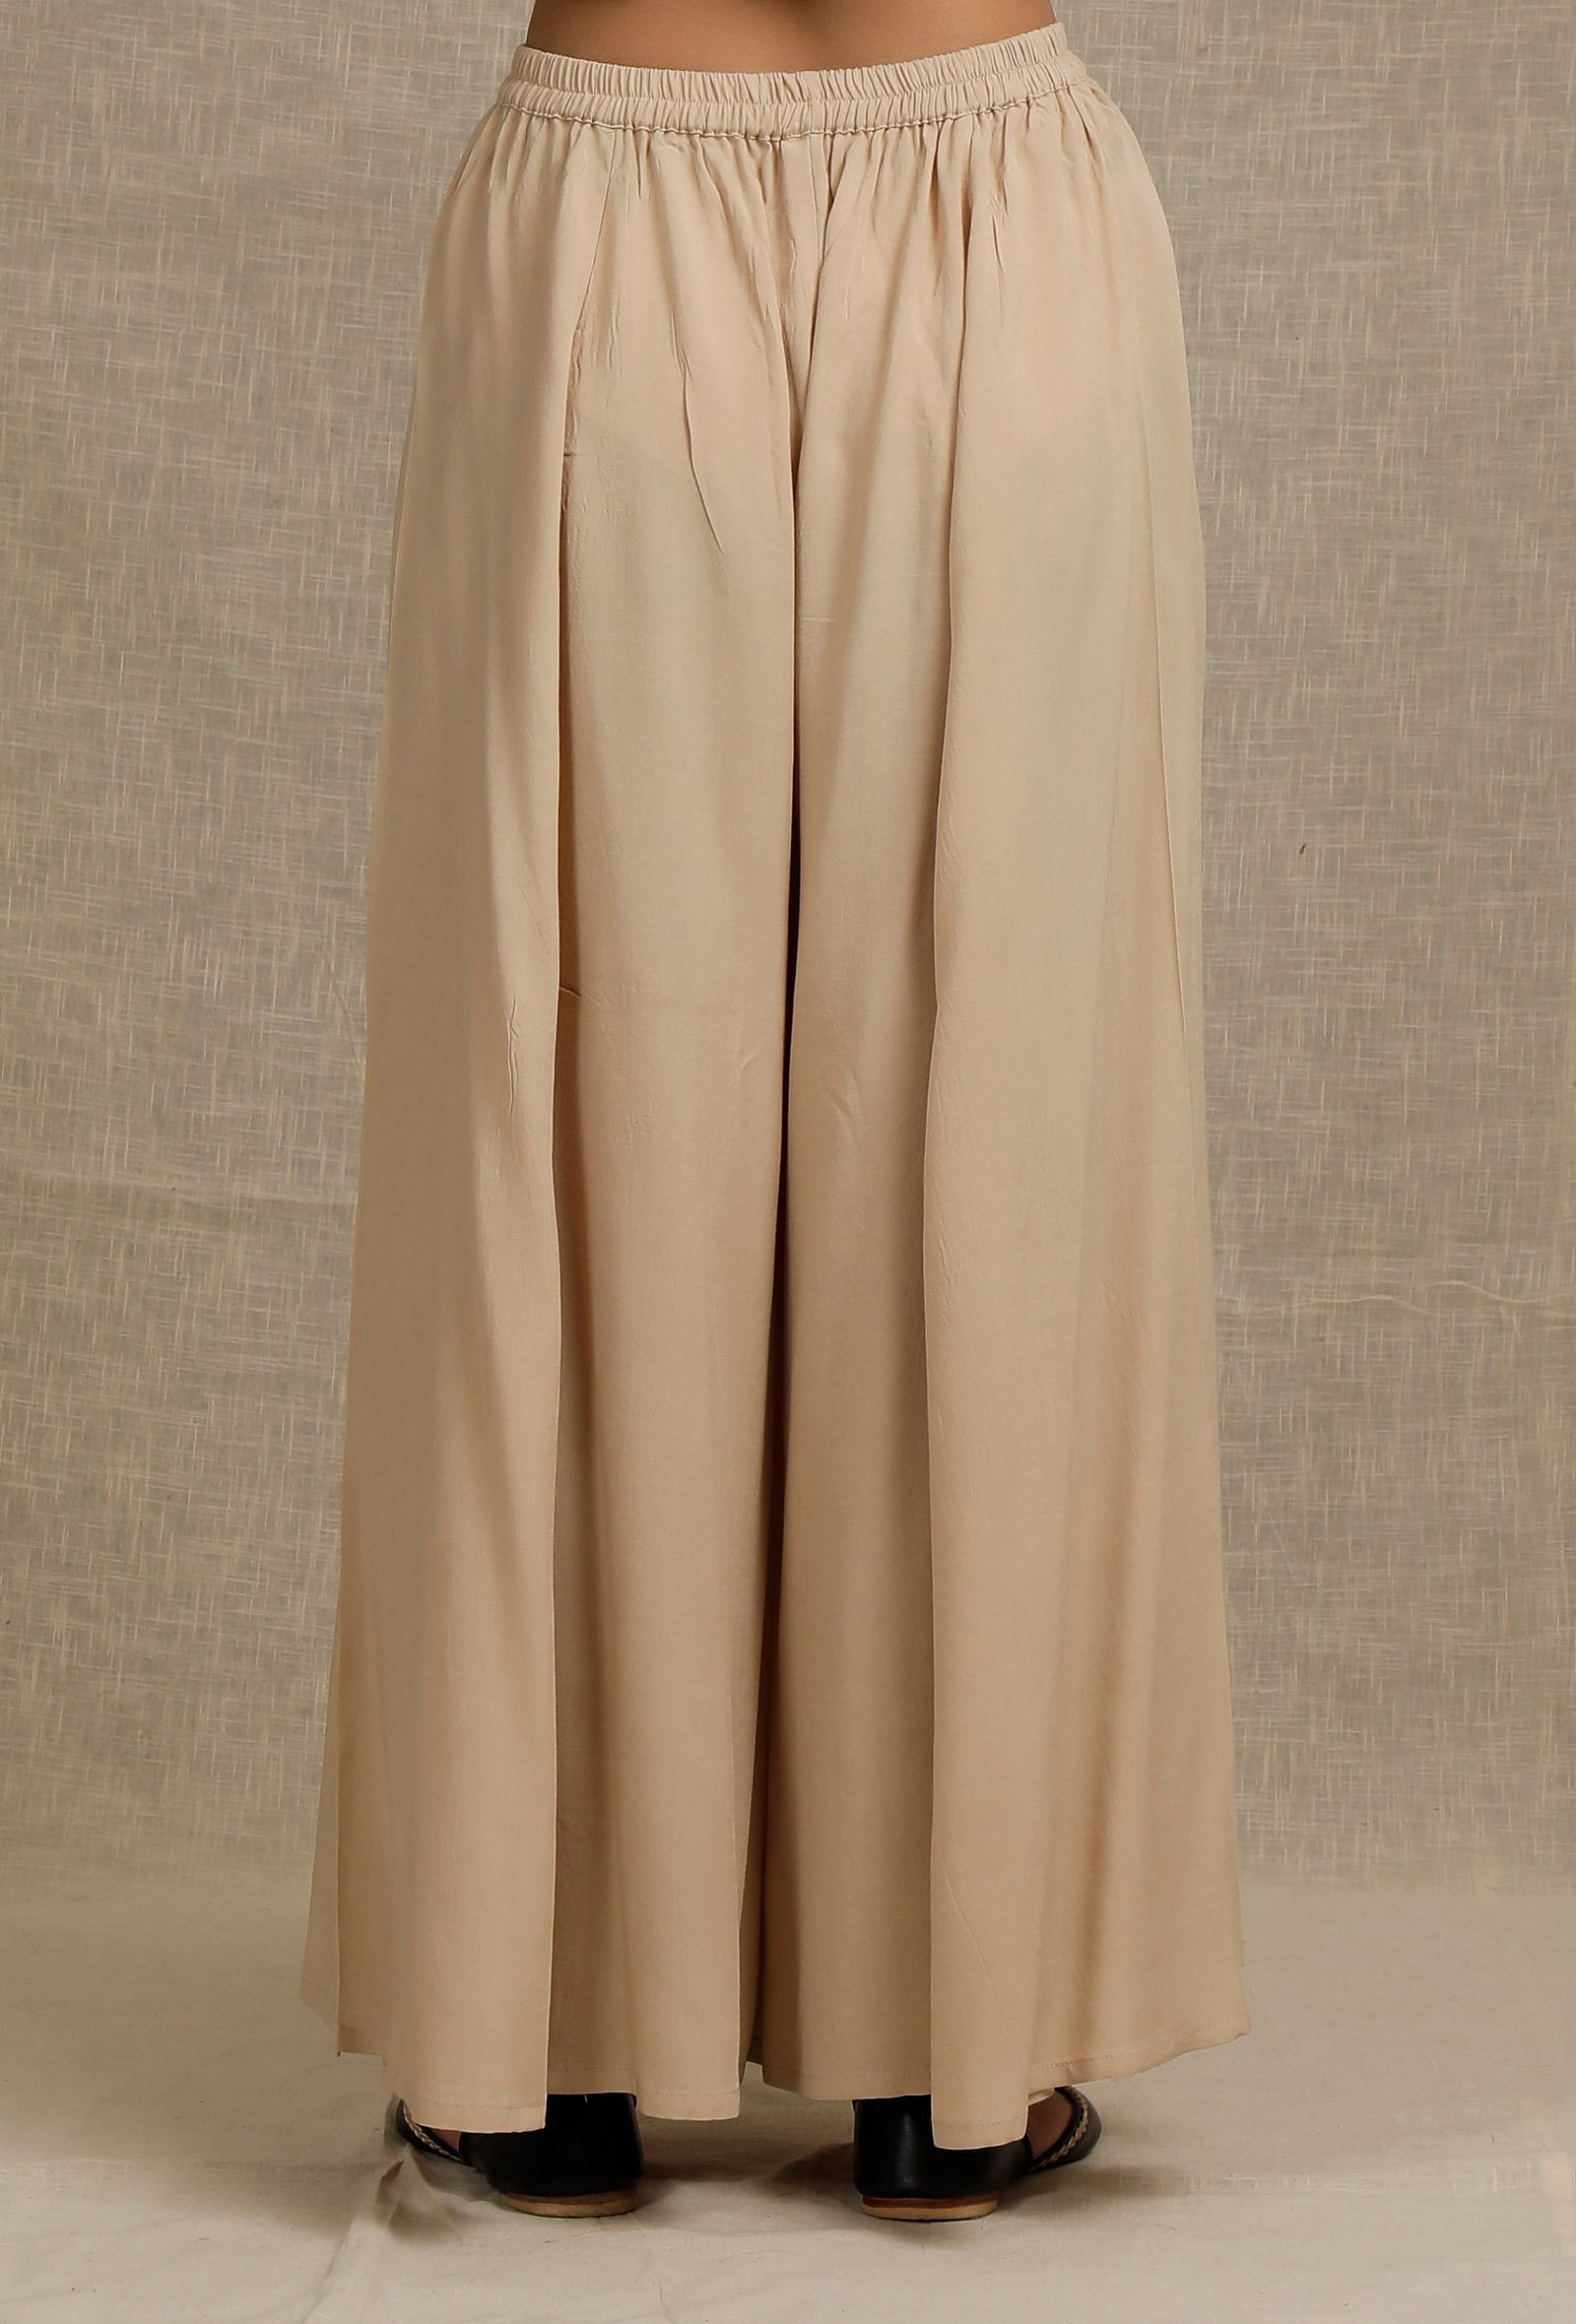 Satin High Waisted Belted Pant in Taupe | LAPOINTE